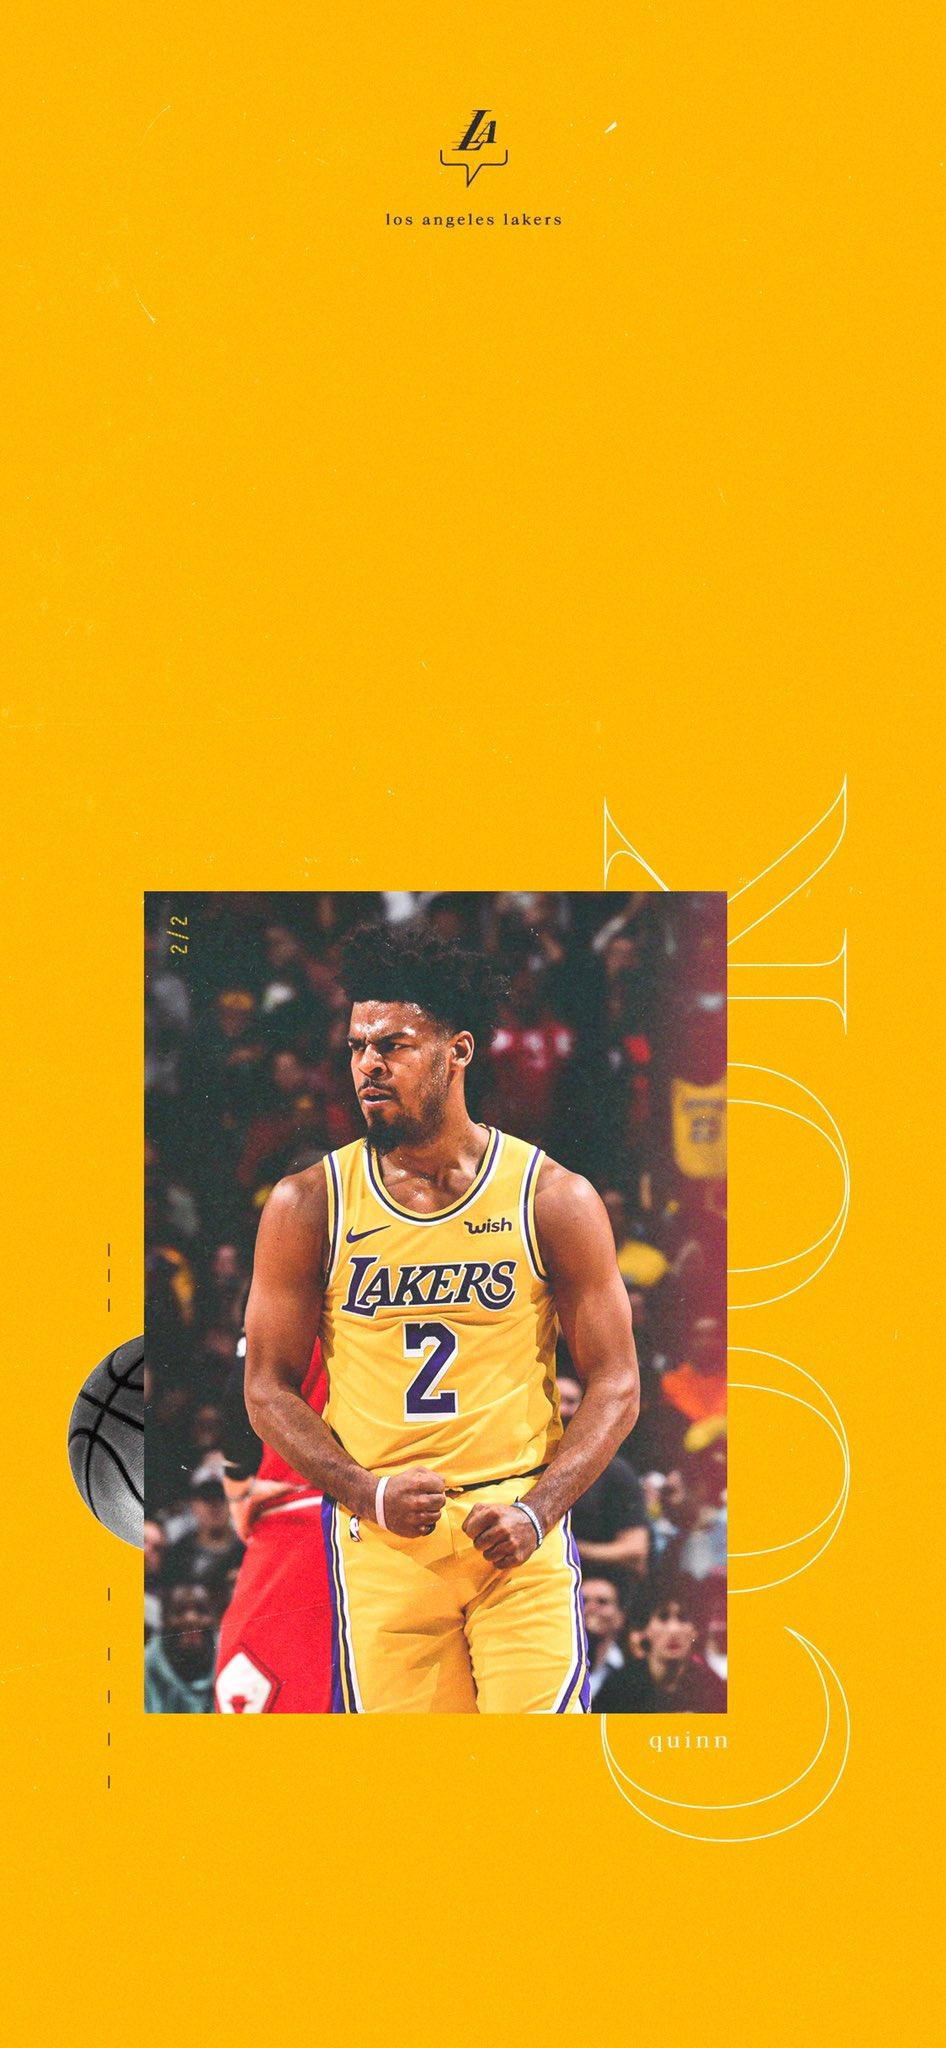 Los Angeles Lakers, hot off the press. #LakeShow